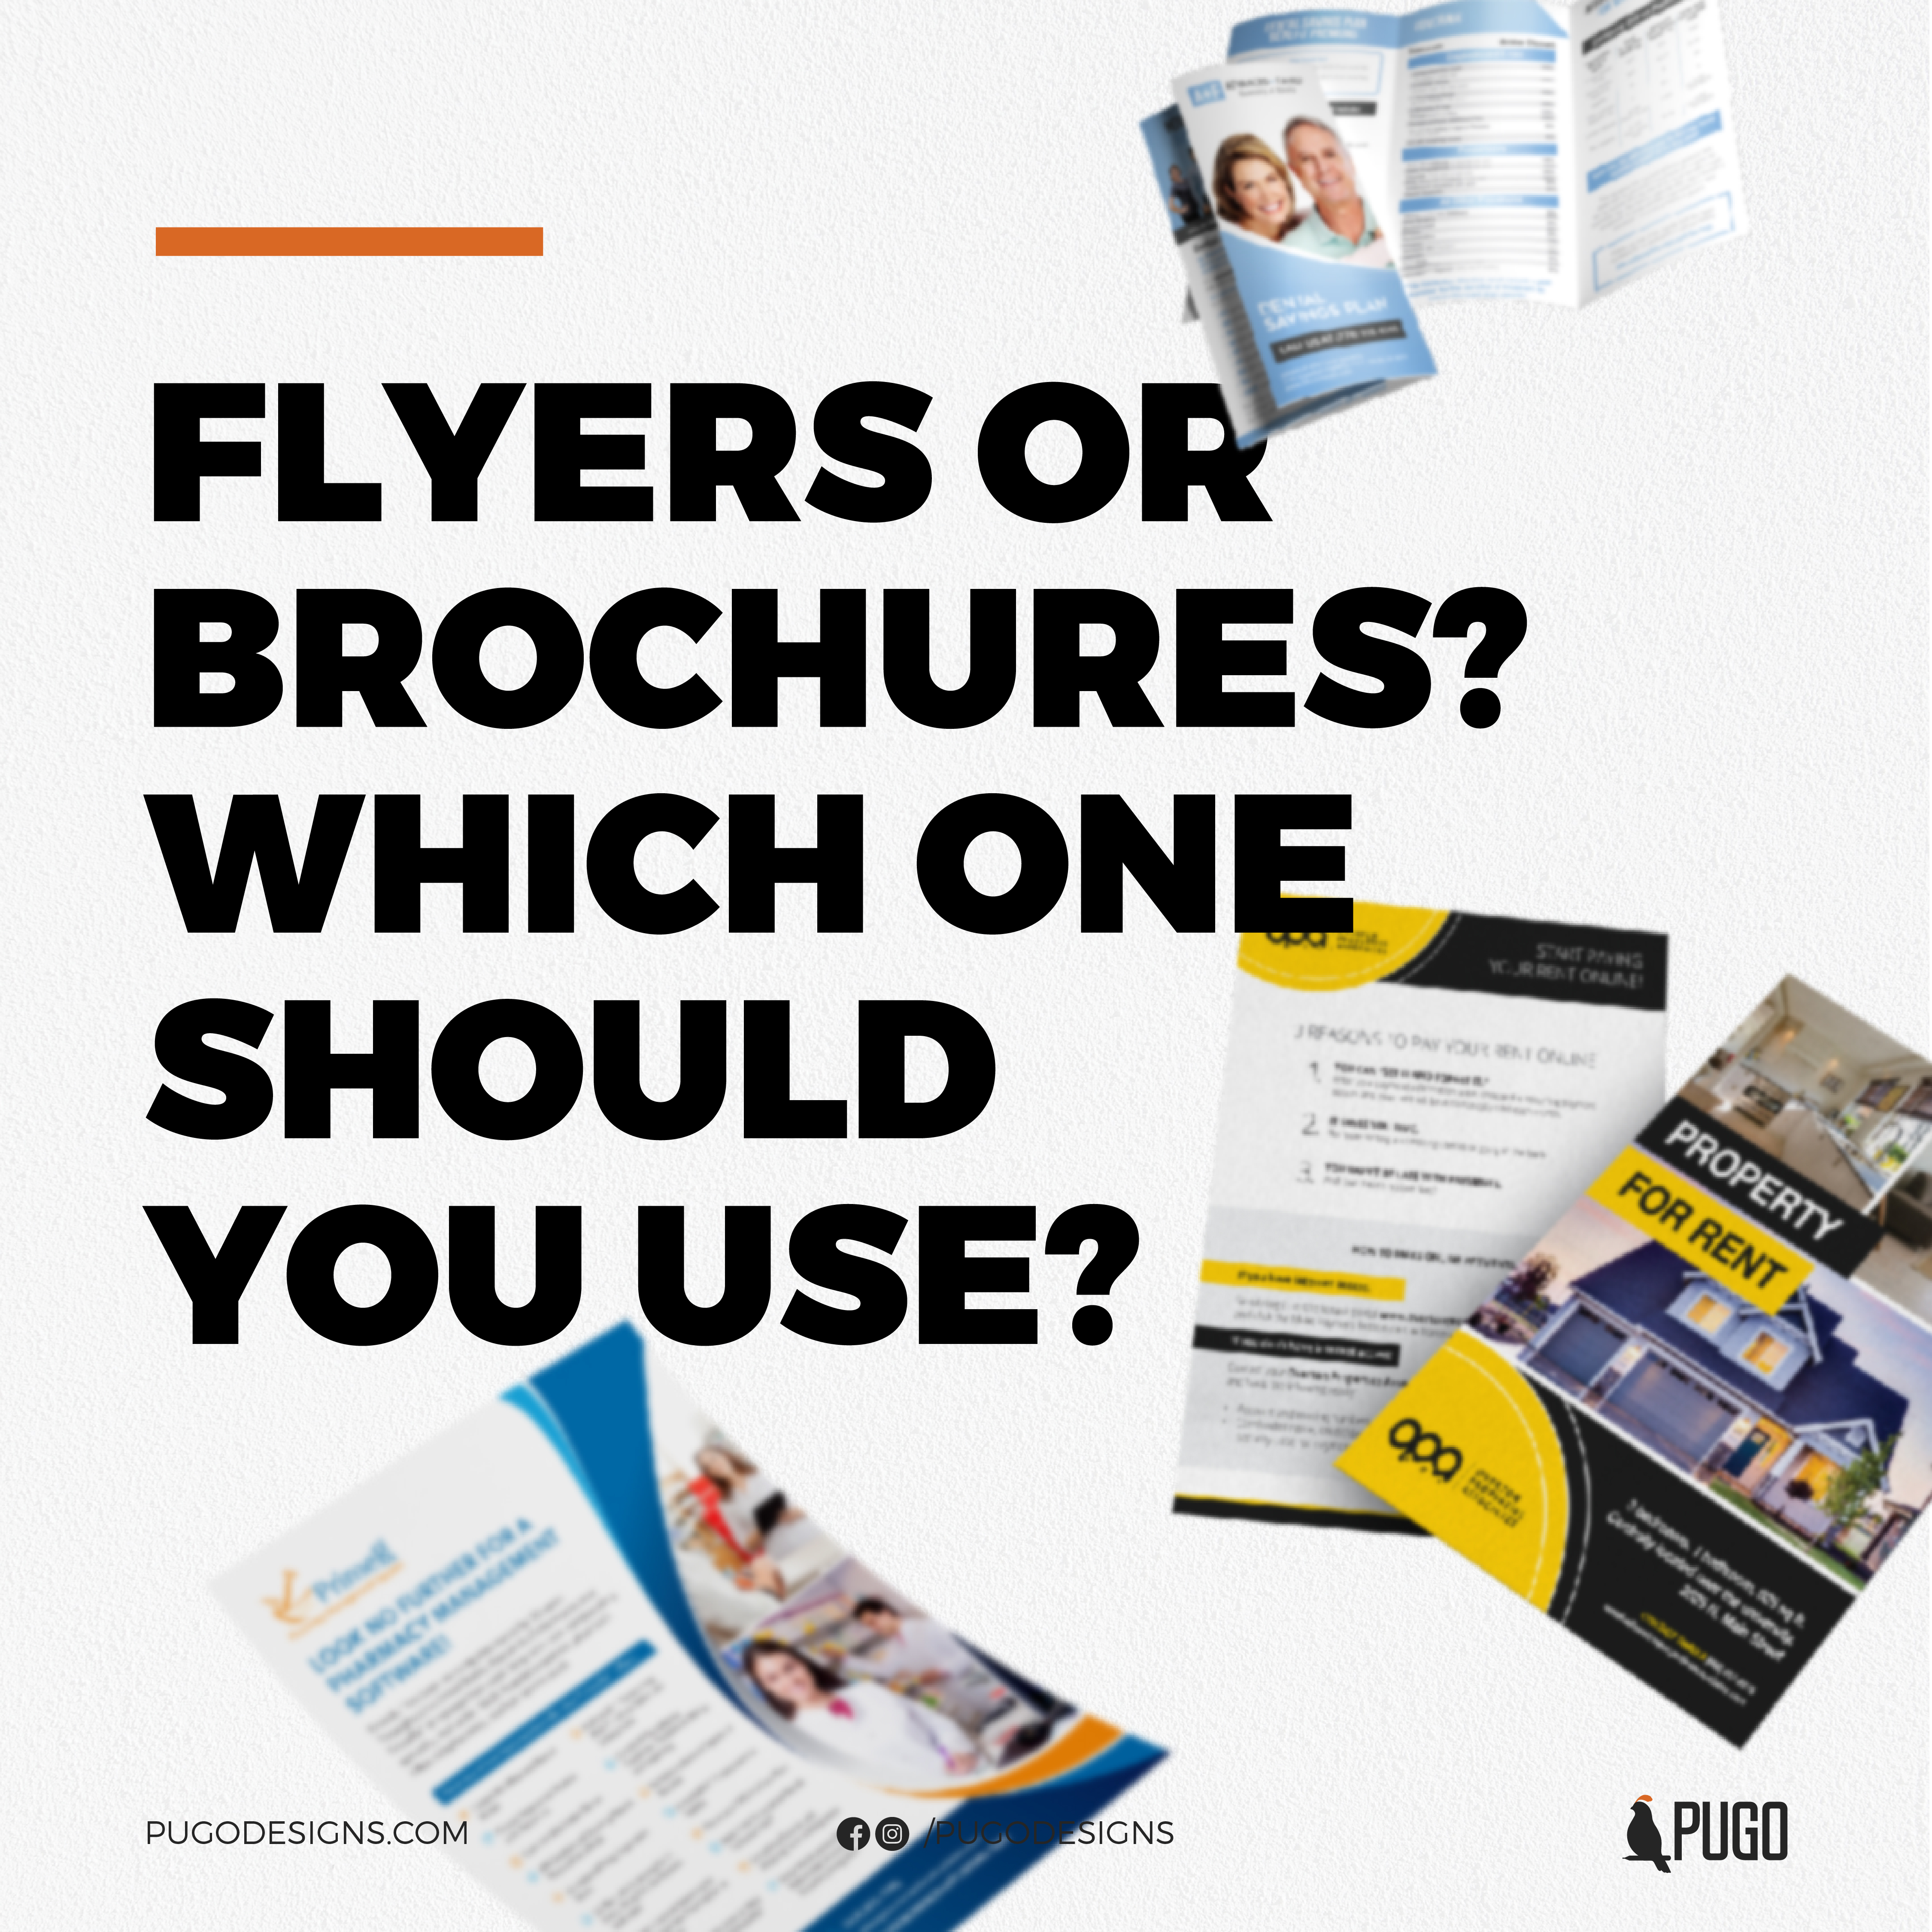 Flyers or brochures? Which one should you use?